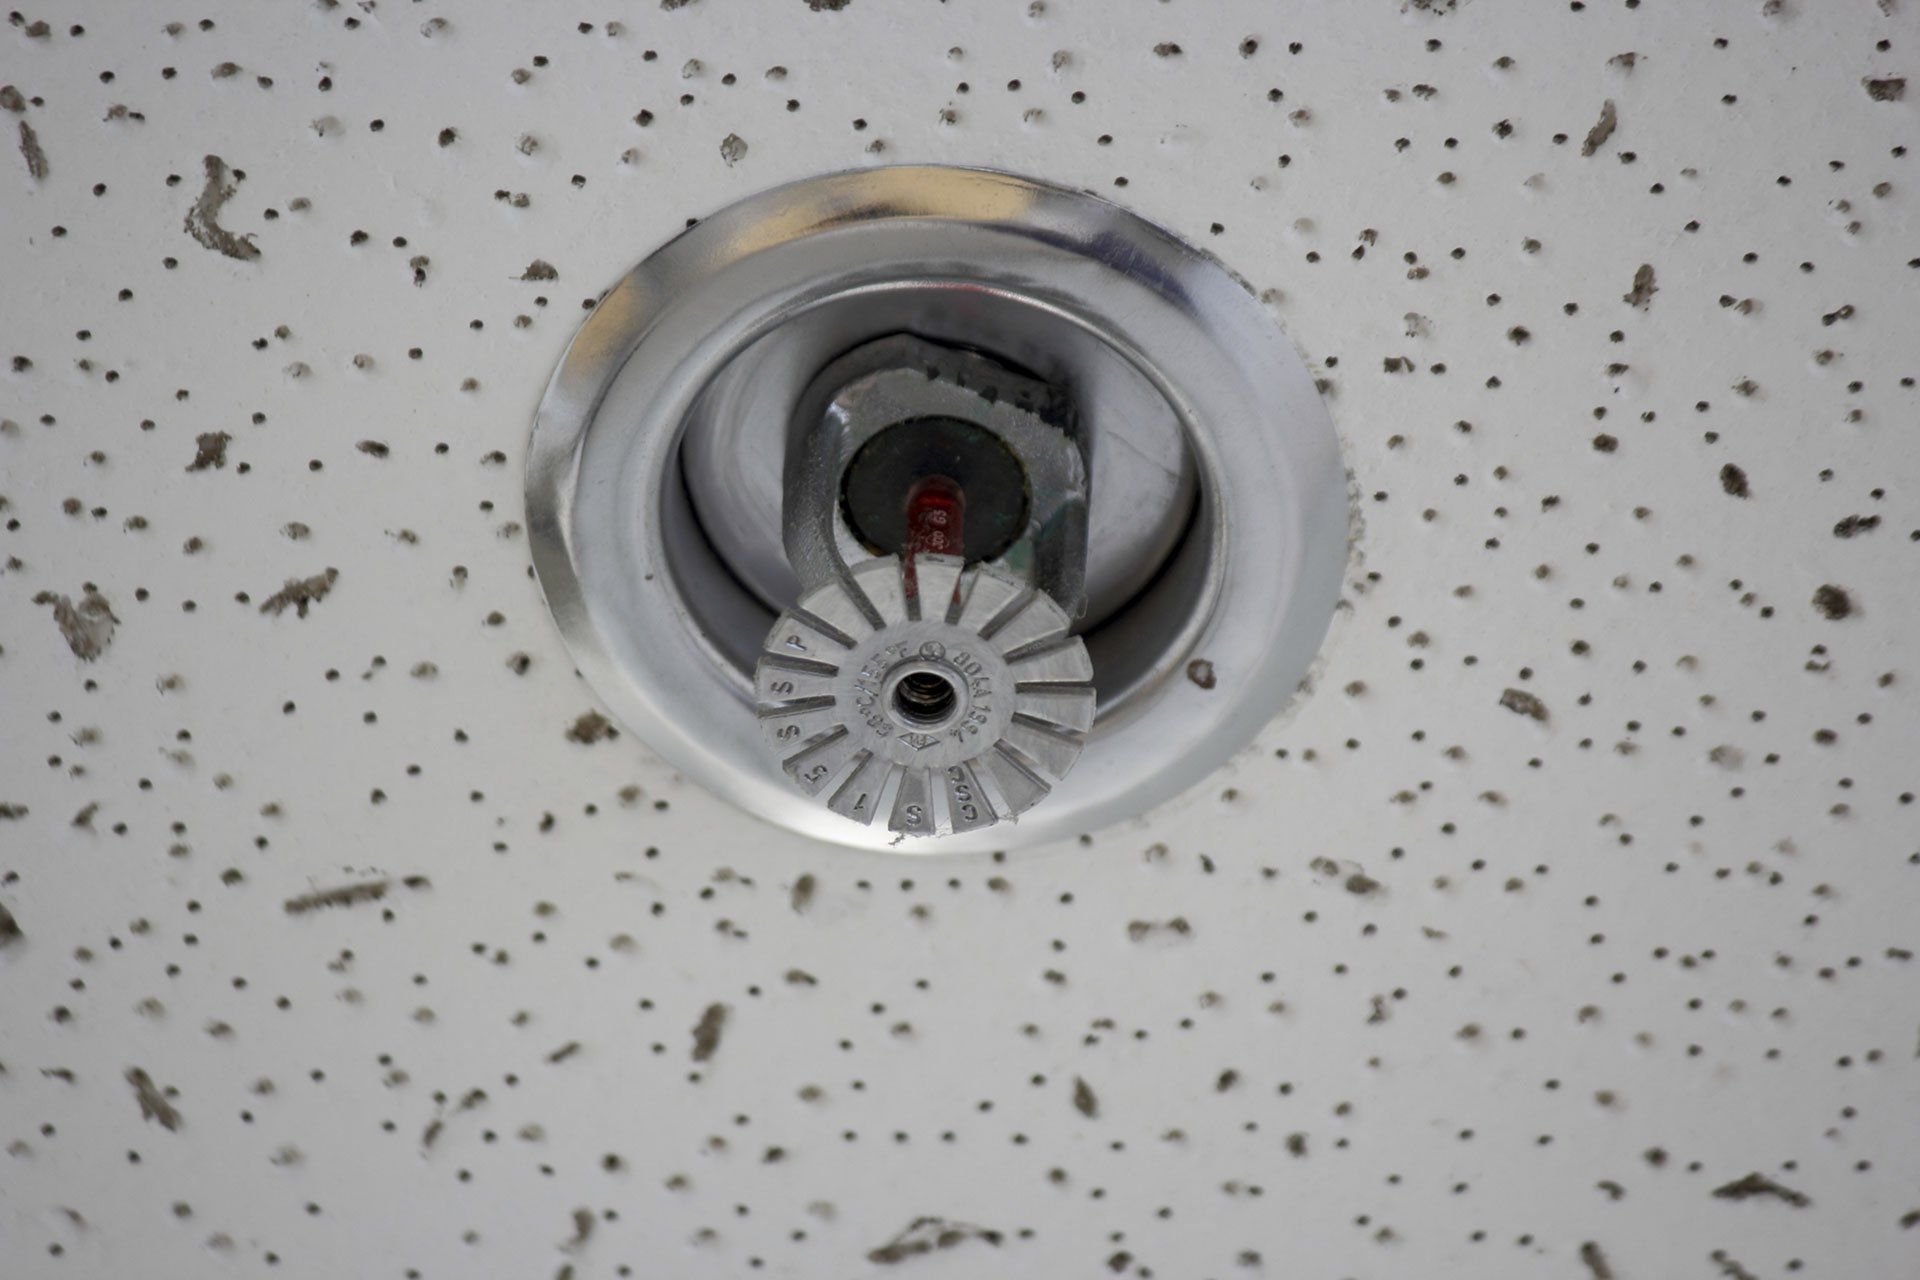 Fire Sprinkler in ceiling | Chillicothe, OH